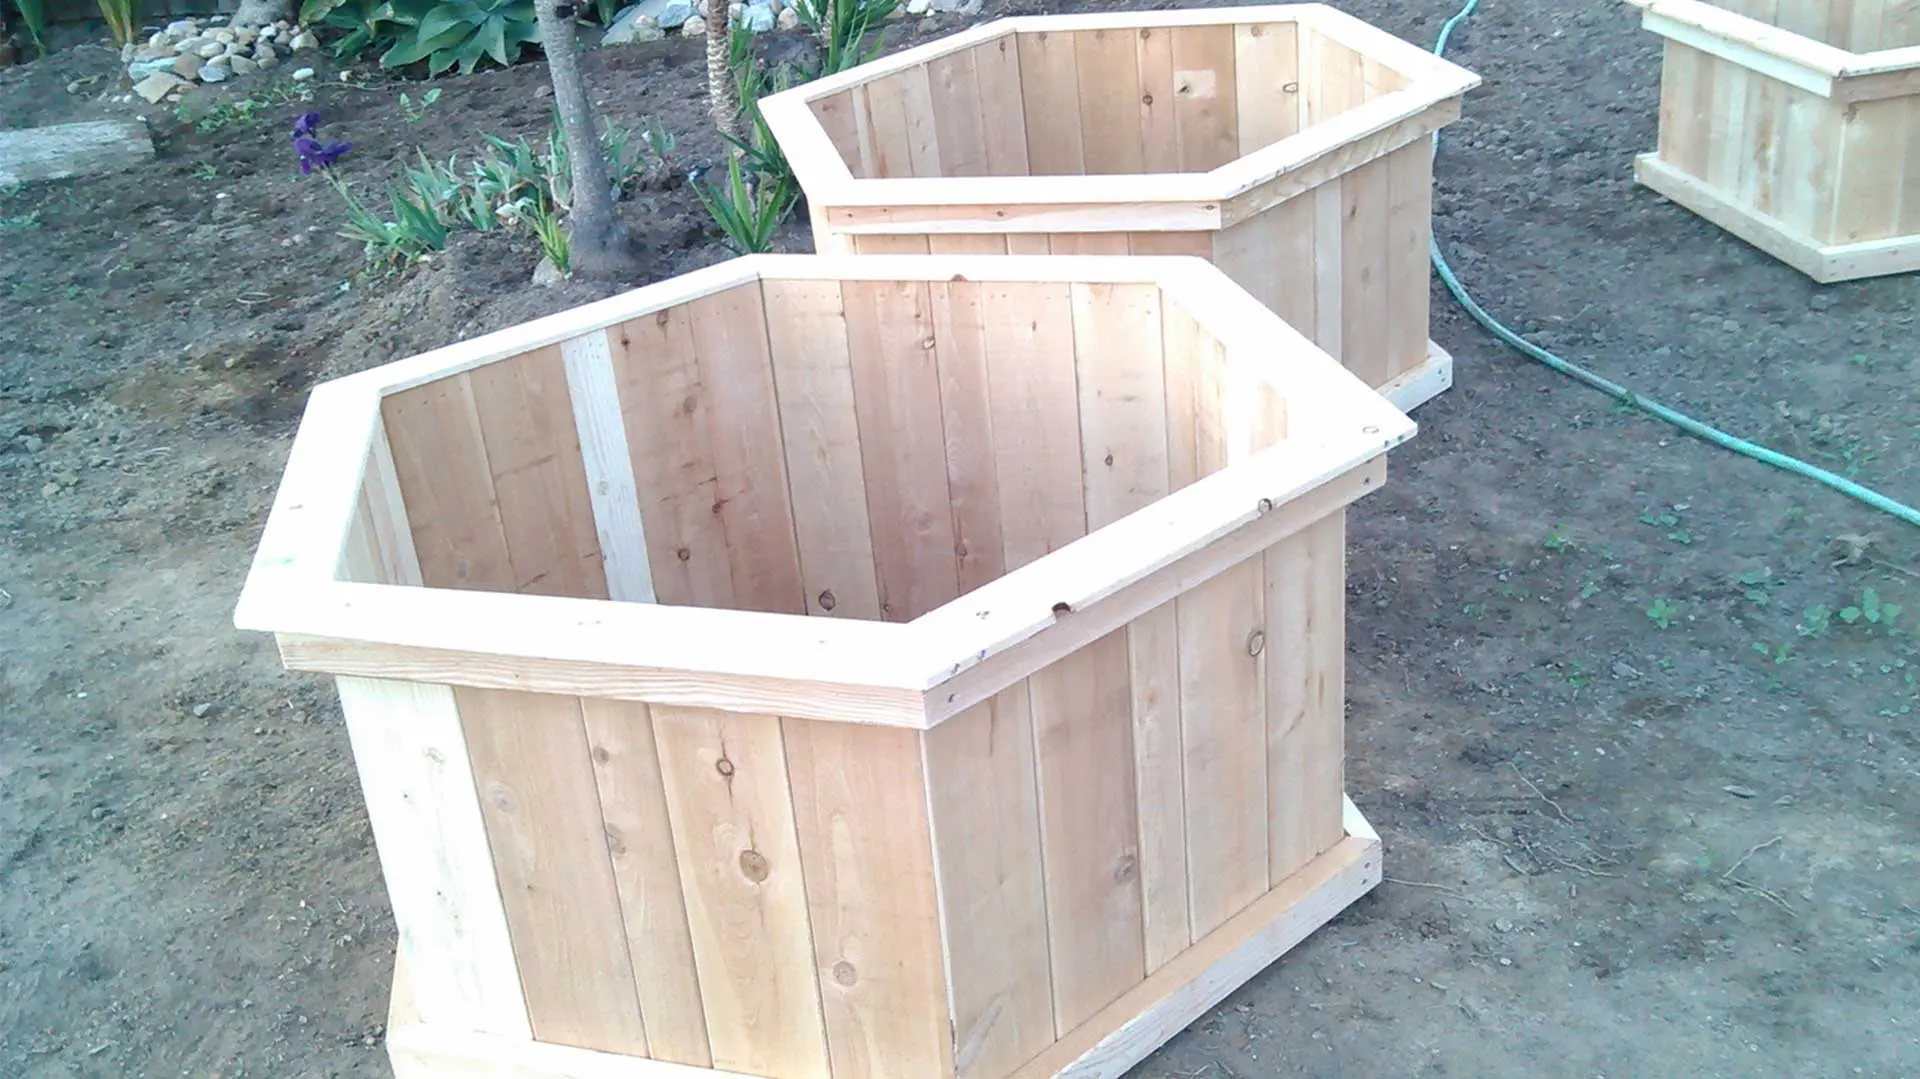 A set of wooden planters in the dirt.